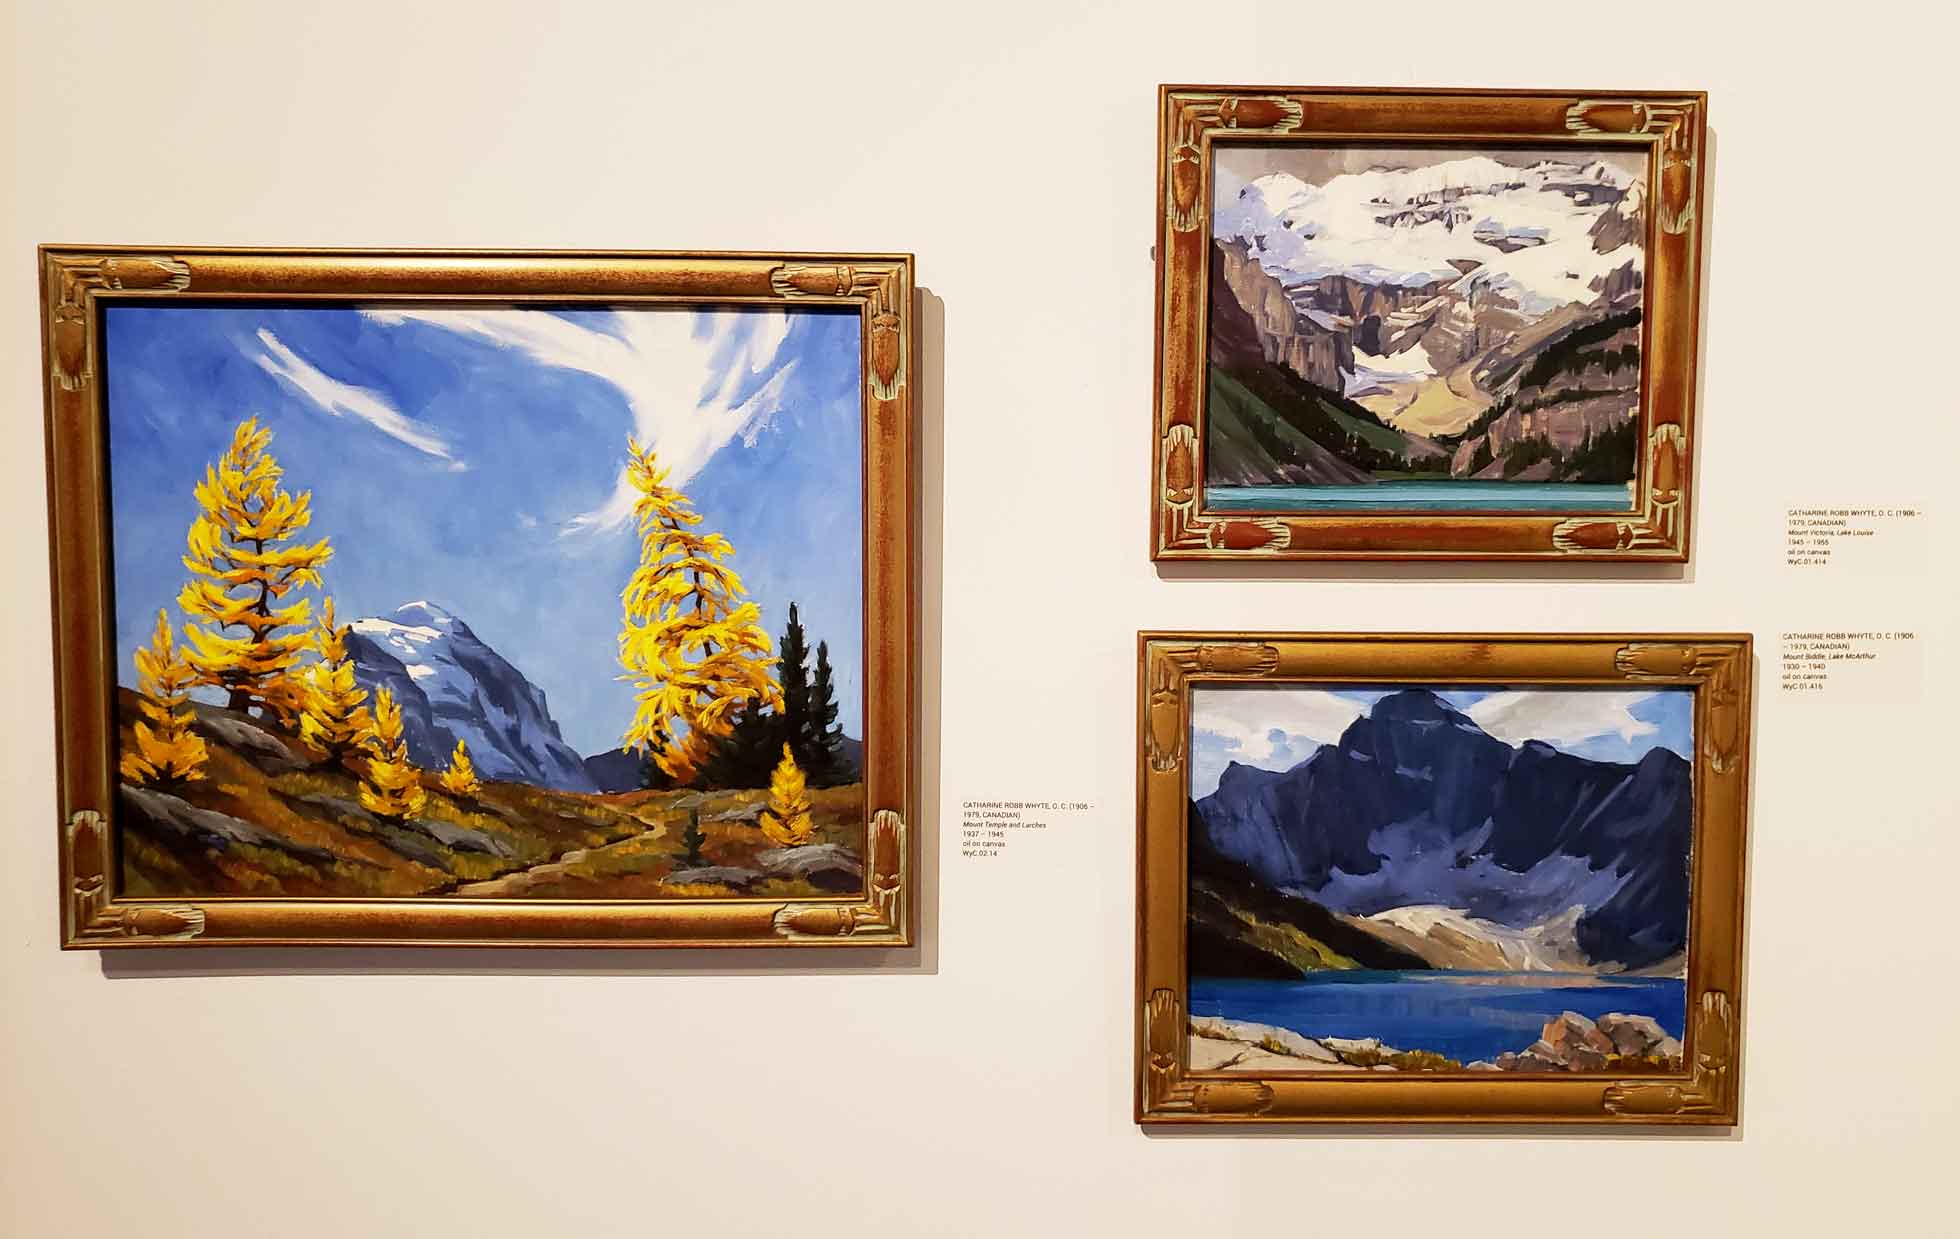 Paintings by Whyte Museum founder Catharine Robb Whyte